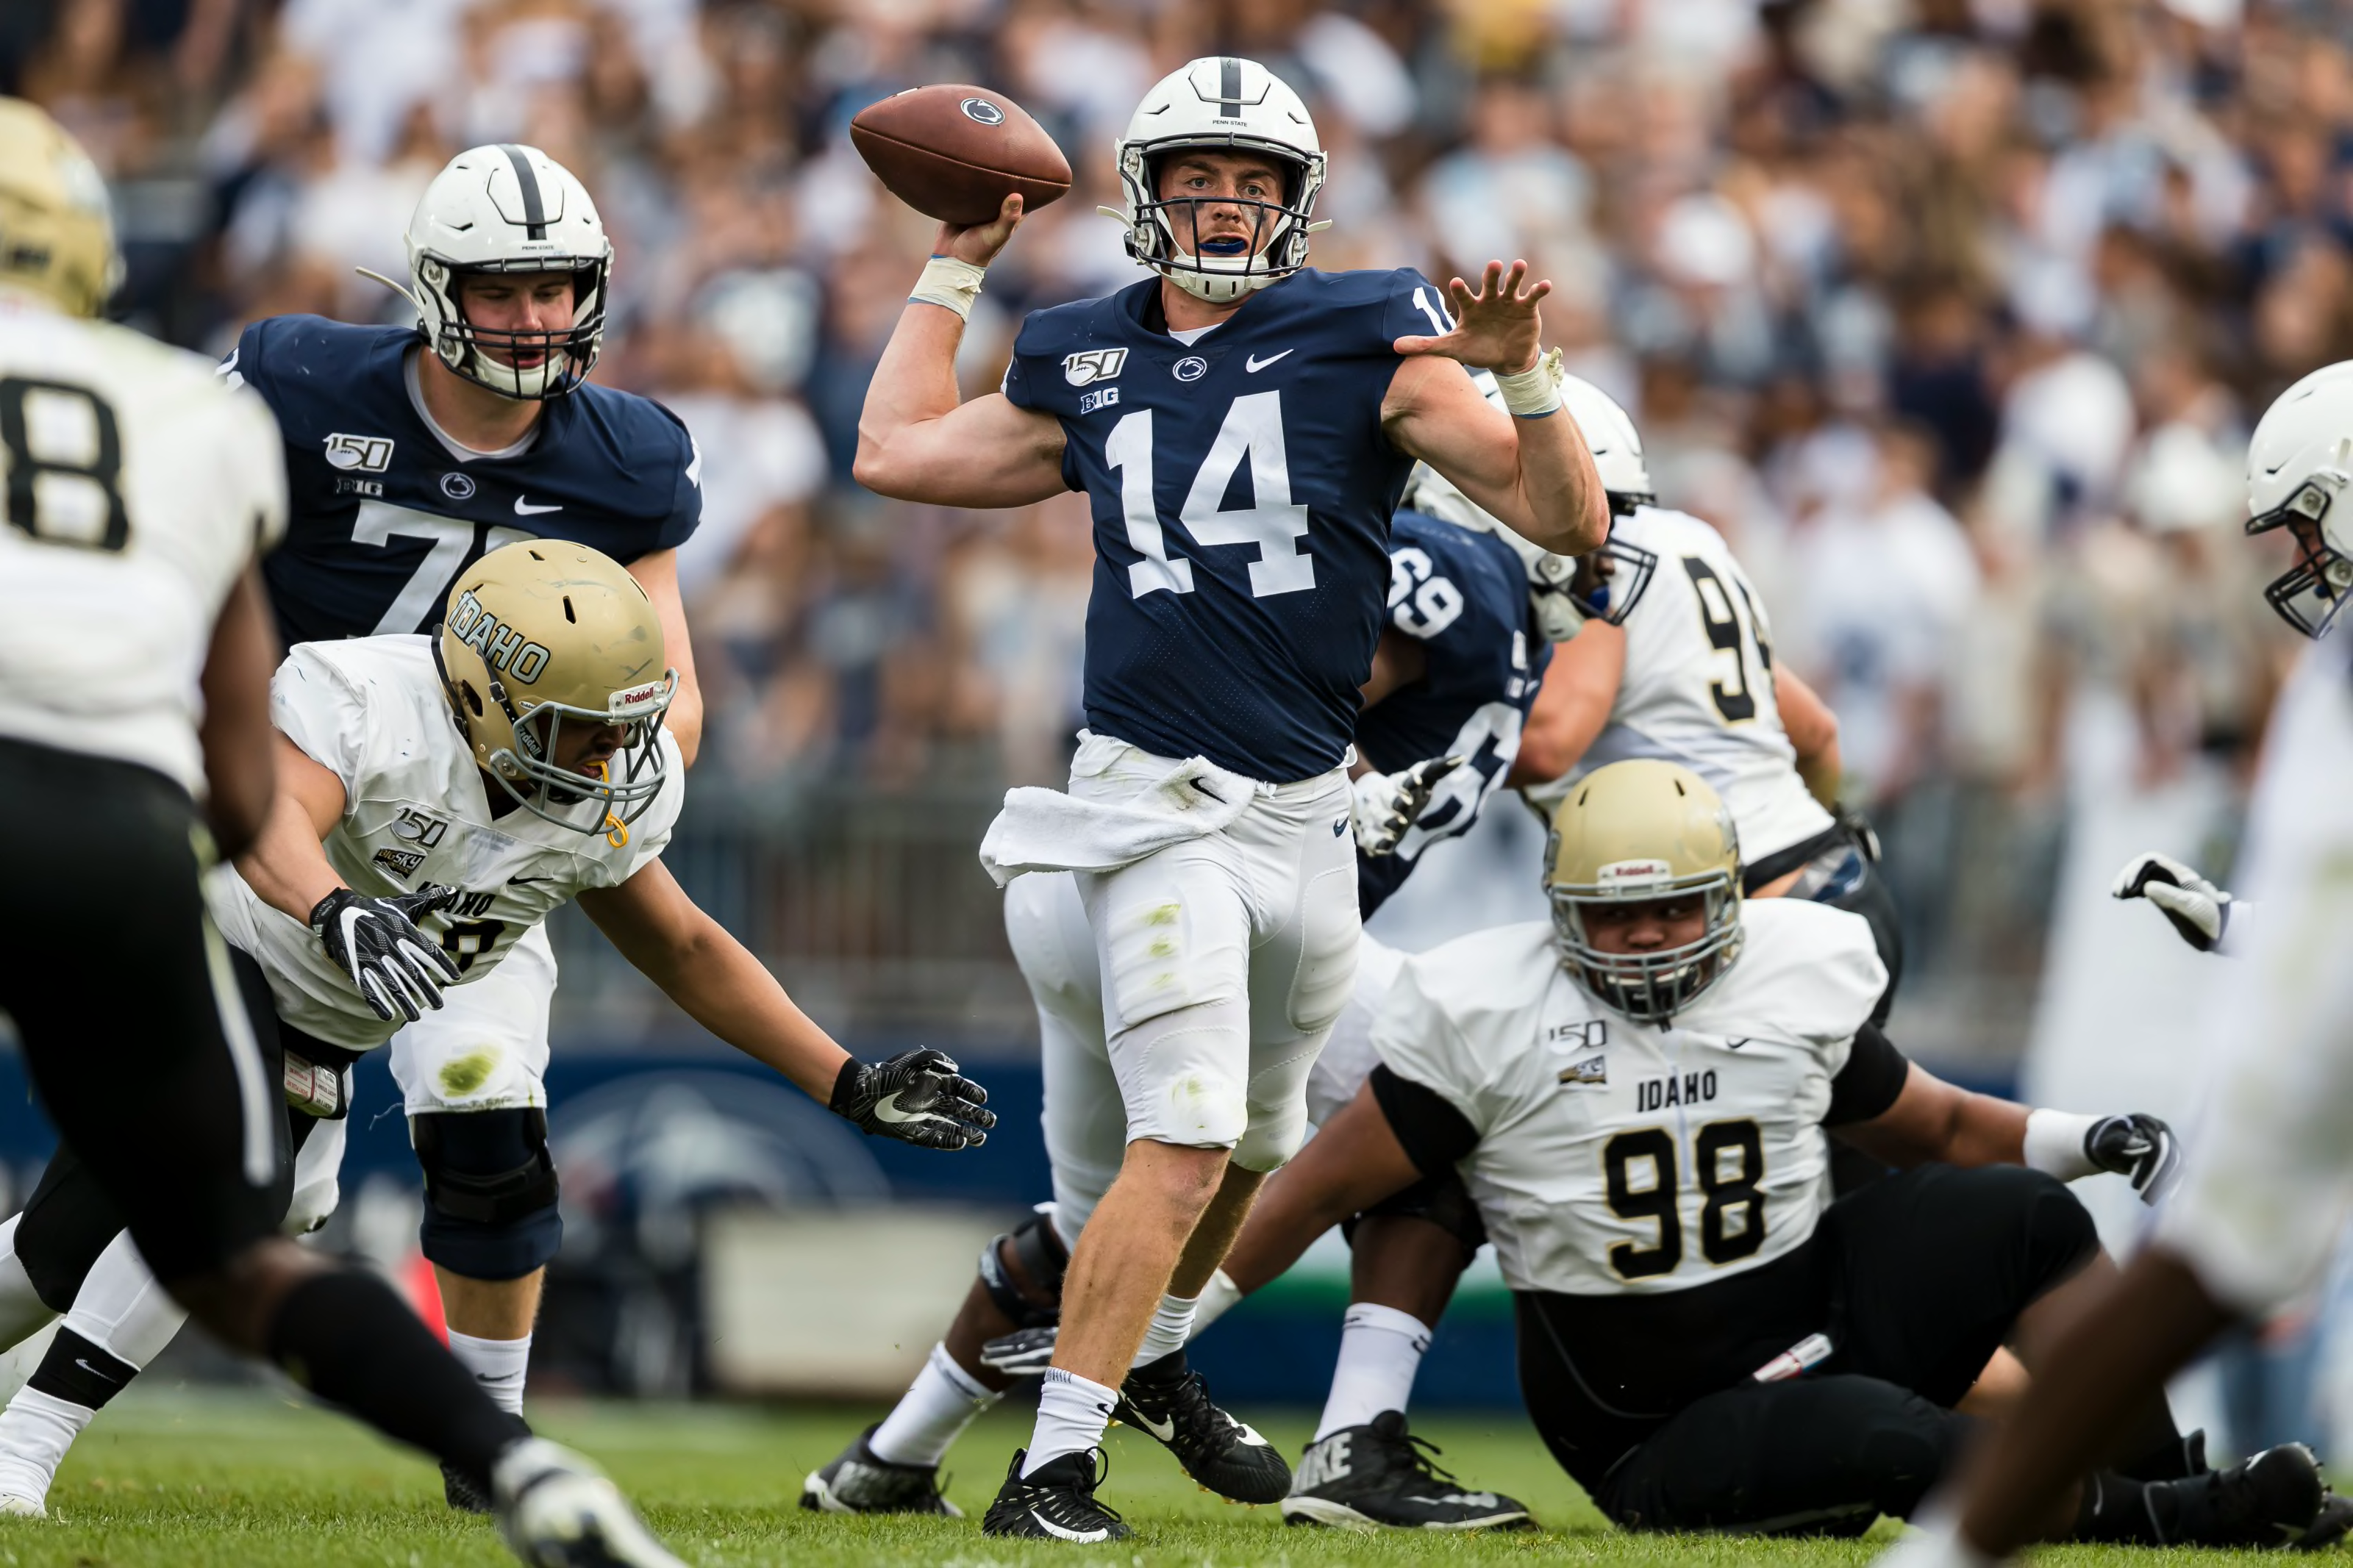 nittany grading taetsch projected